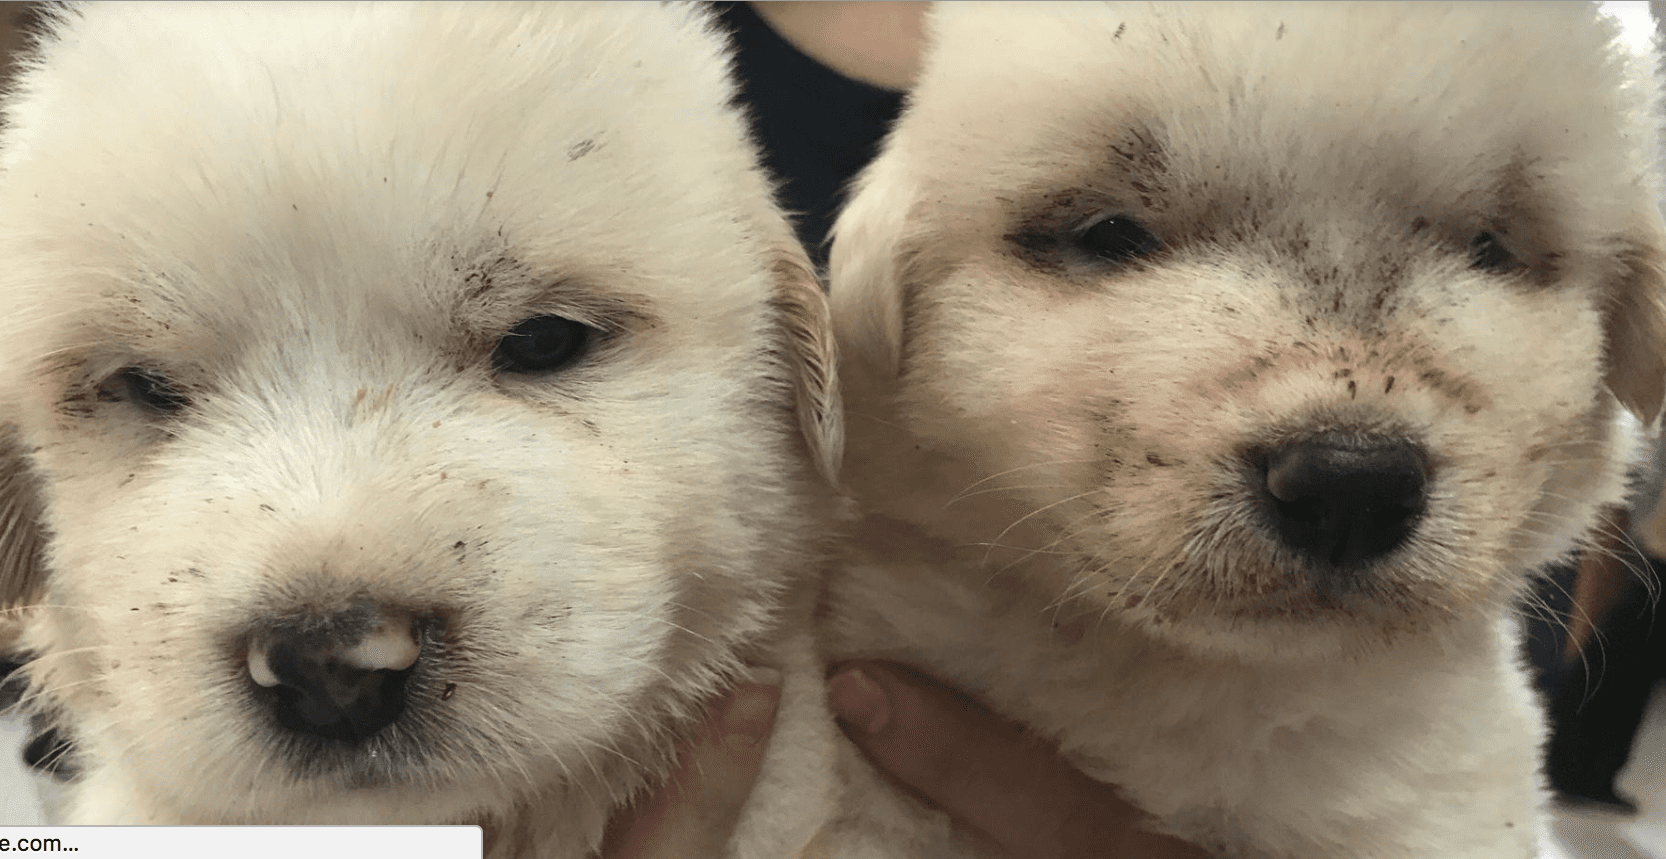 Alaqua to Help Rescue 50-80 Great Pyrenees Dogs